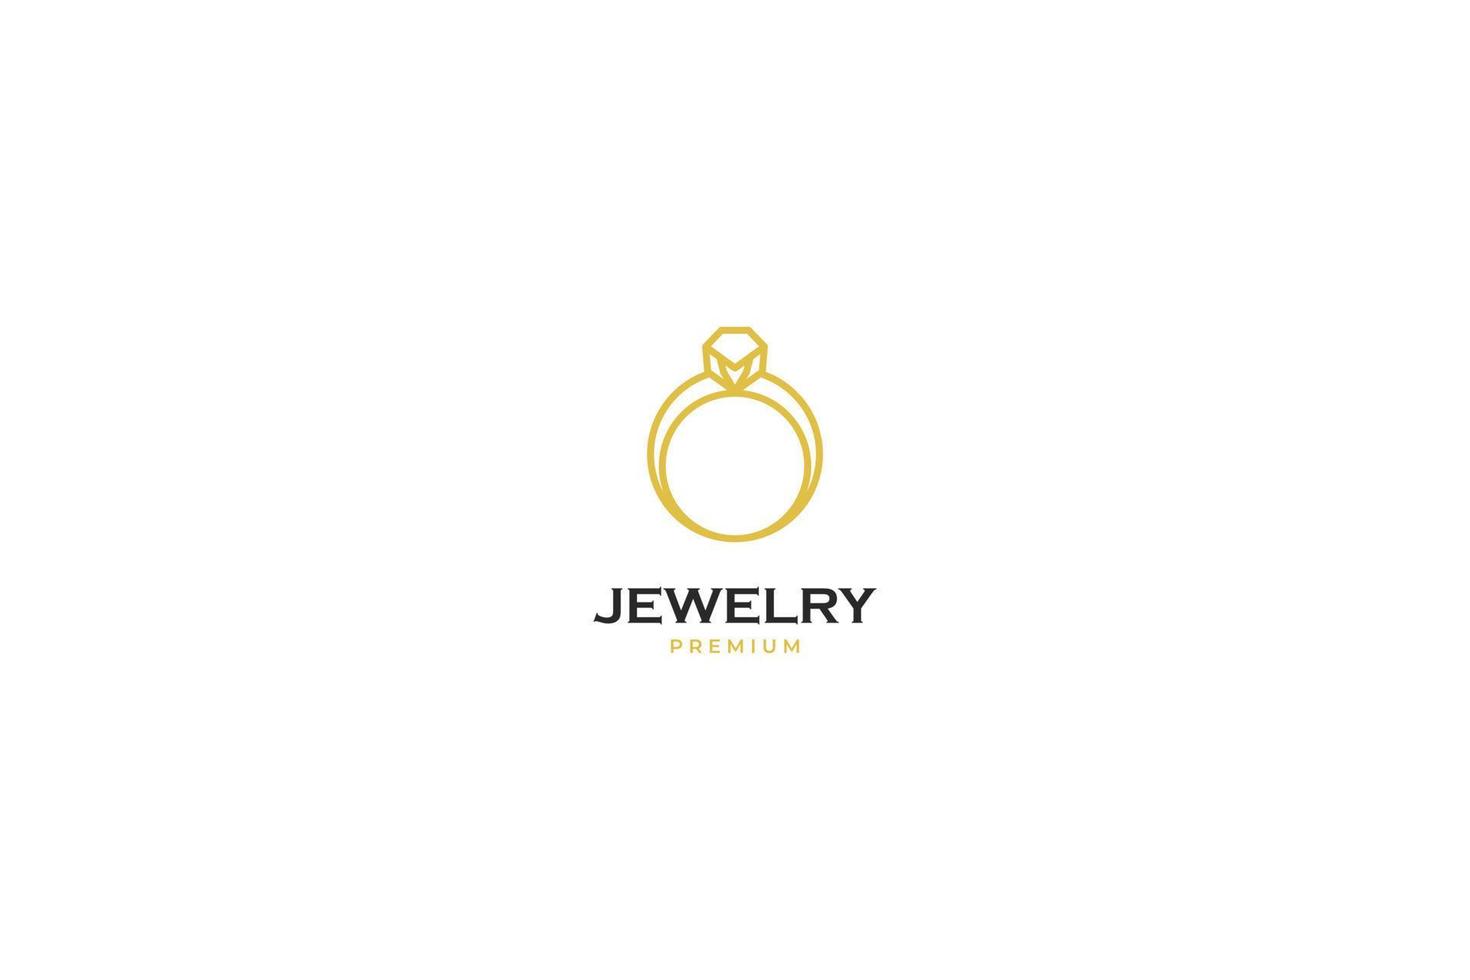 Flat ring jewelry logo vector icon design template. Elegant, beauty, royal